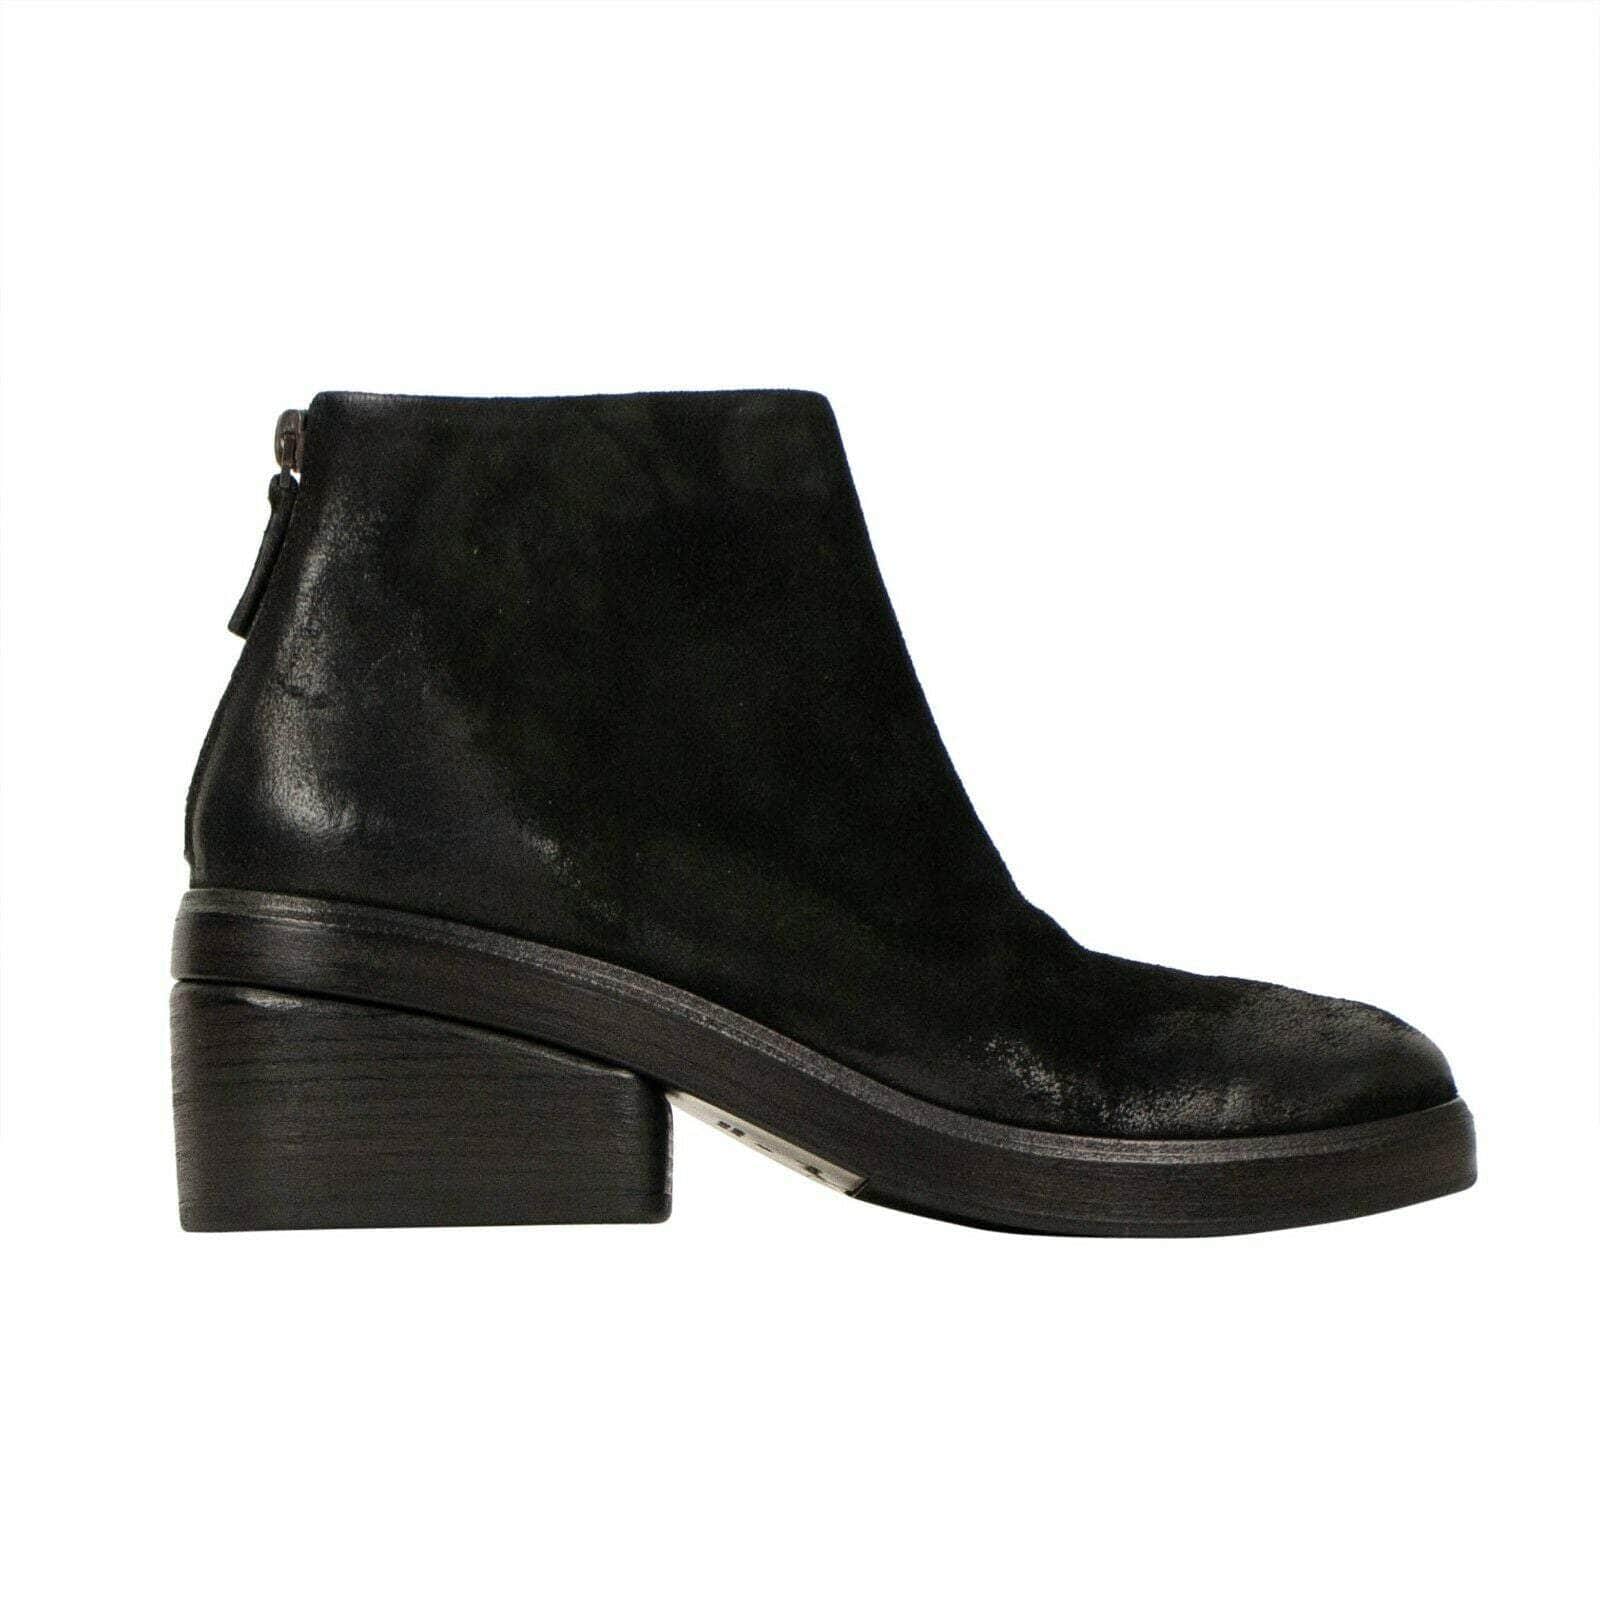 Marsell channelenable-all, chicmi, couponcollection, gender-womens, main-shoes, marsell, shop375, size-9, under-250, womens-booties 9 Bo Ceppo' Black Distressed Leather Ankle Boots 69LE-2100/9 69LE-2100/9